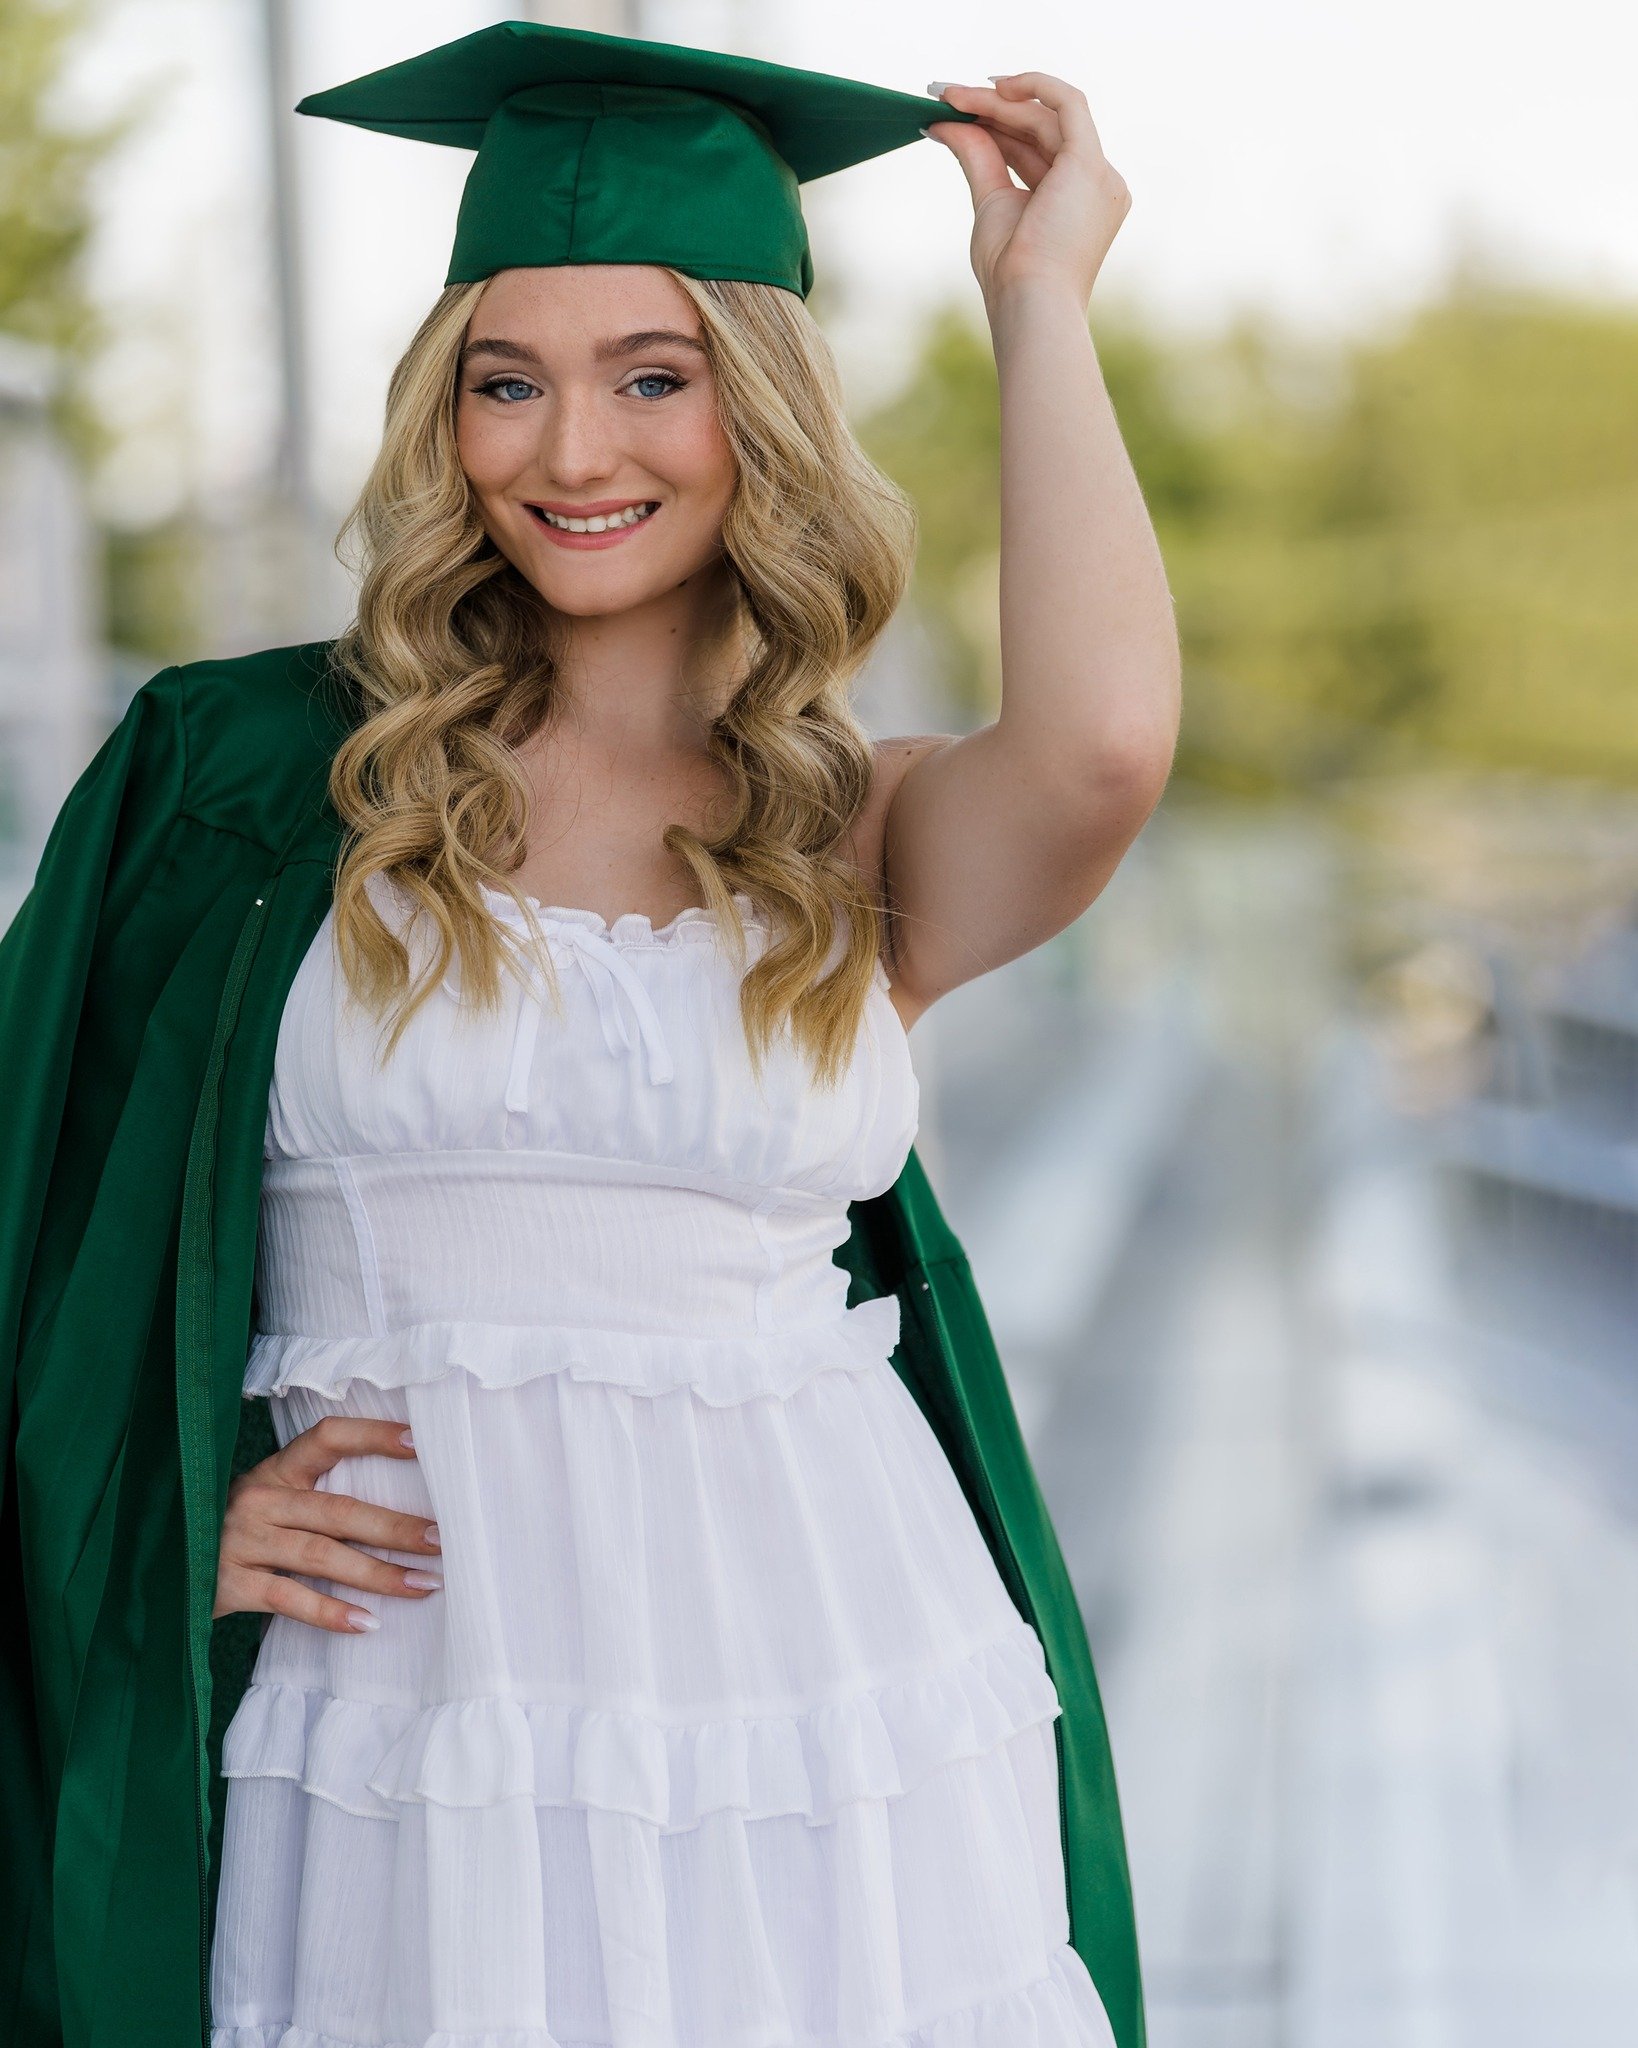 One of our favorite ways to personalize your Cap &amp; Gown Experience is to photograph on location at your high school campus! This is your year, 2024!

Book your Cap &amp; Gown session now - link in bio! 

#studiobportraits #studiobseniors #studiob